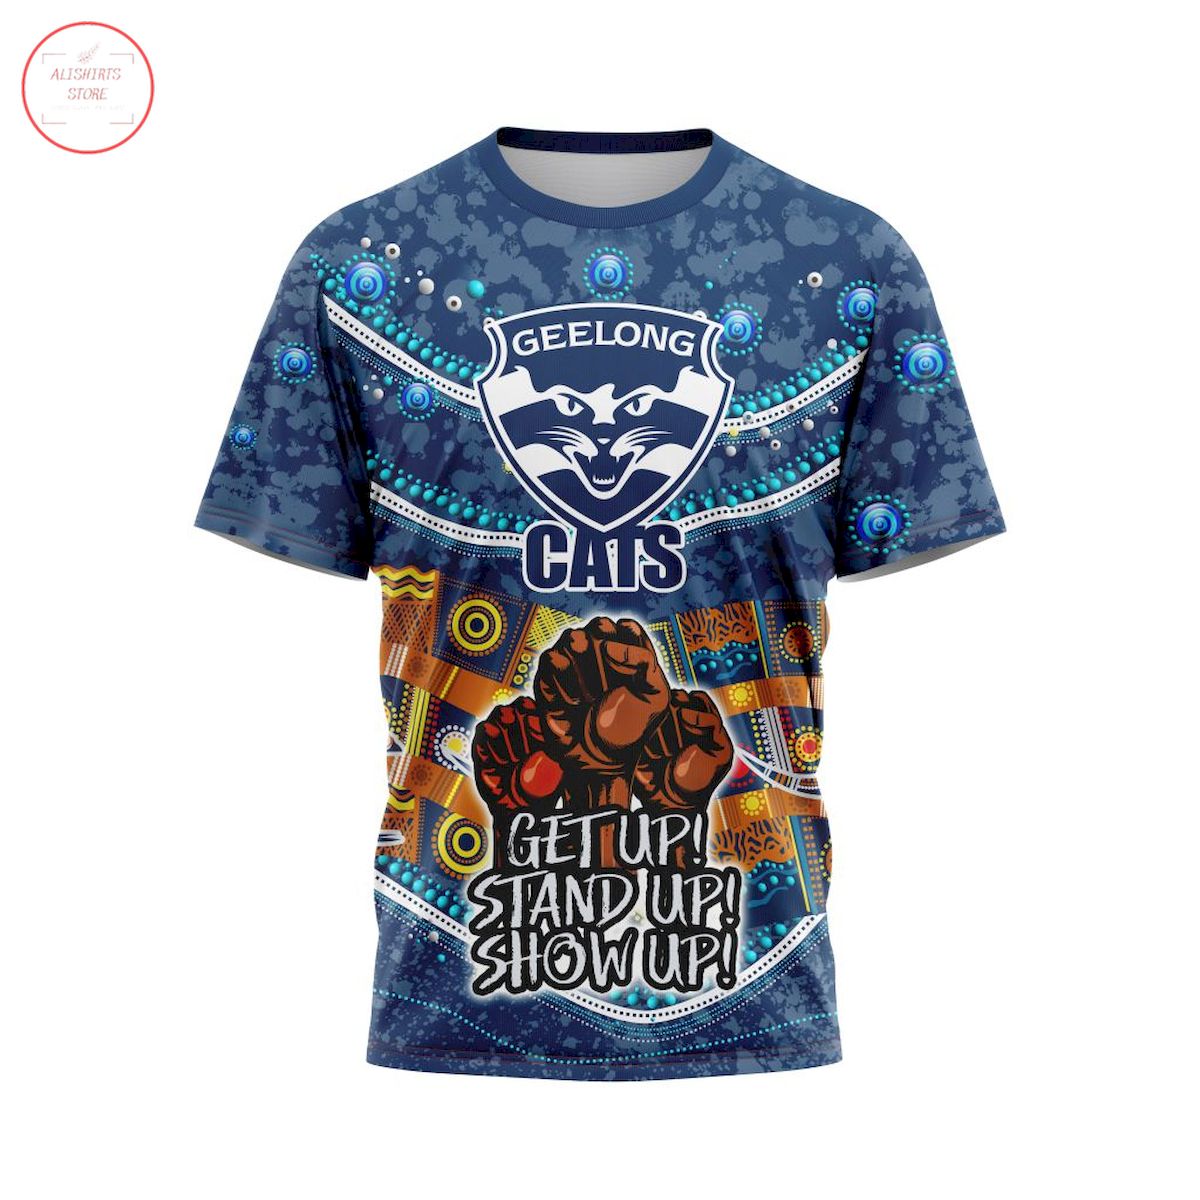 AFL Geelong Cats Customized All Over Printed Shirts